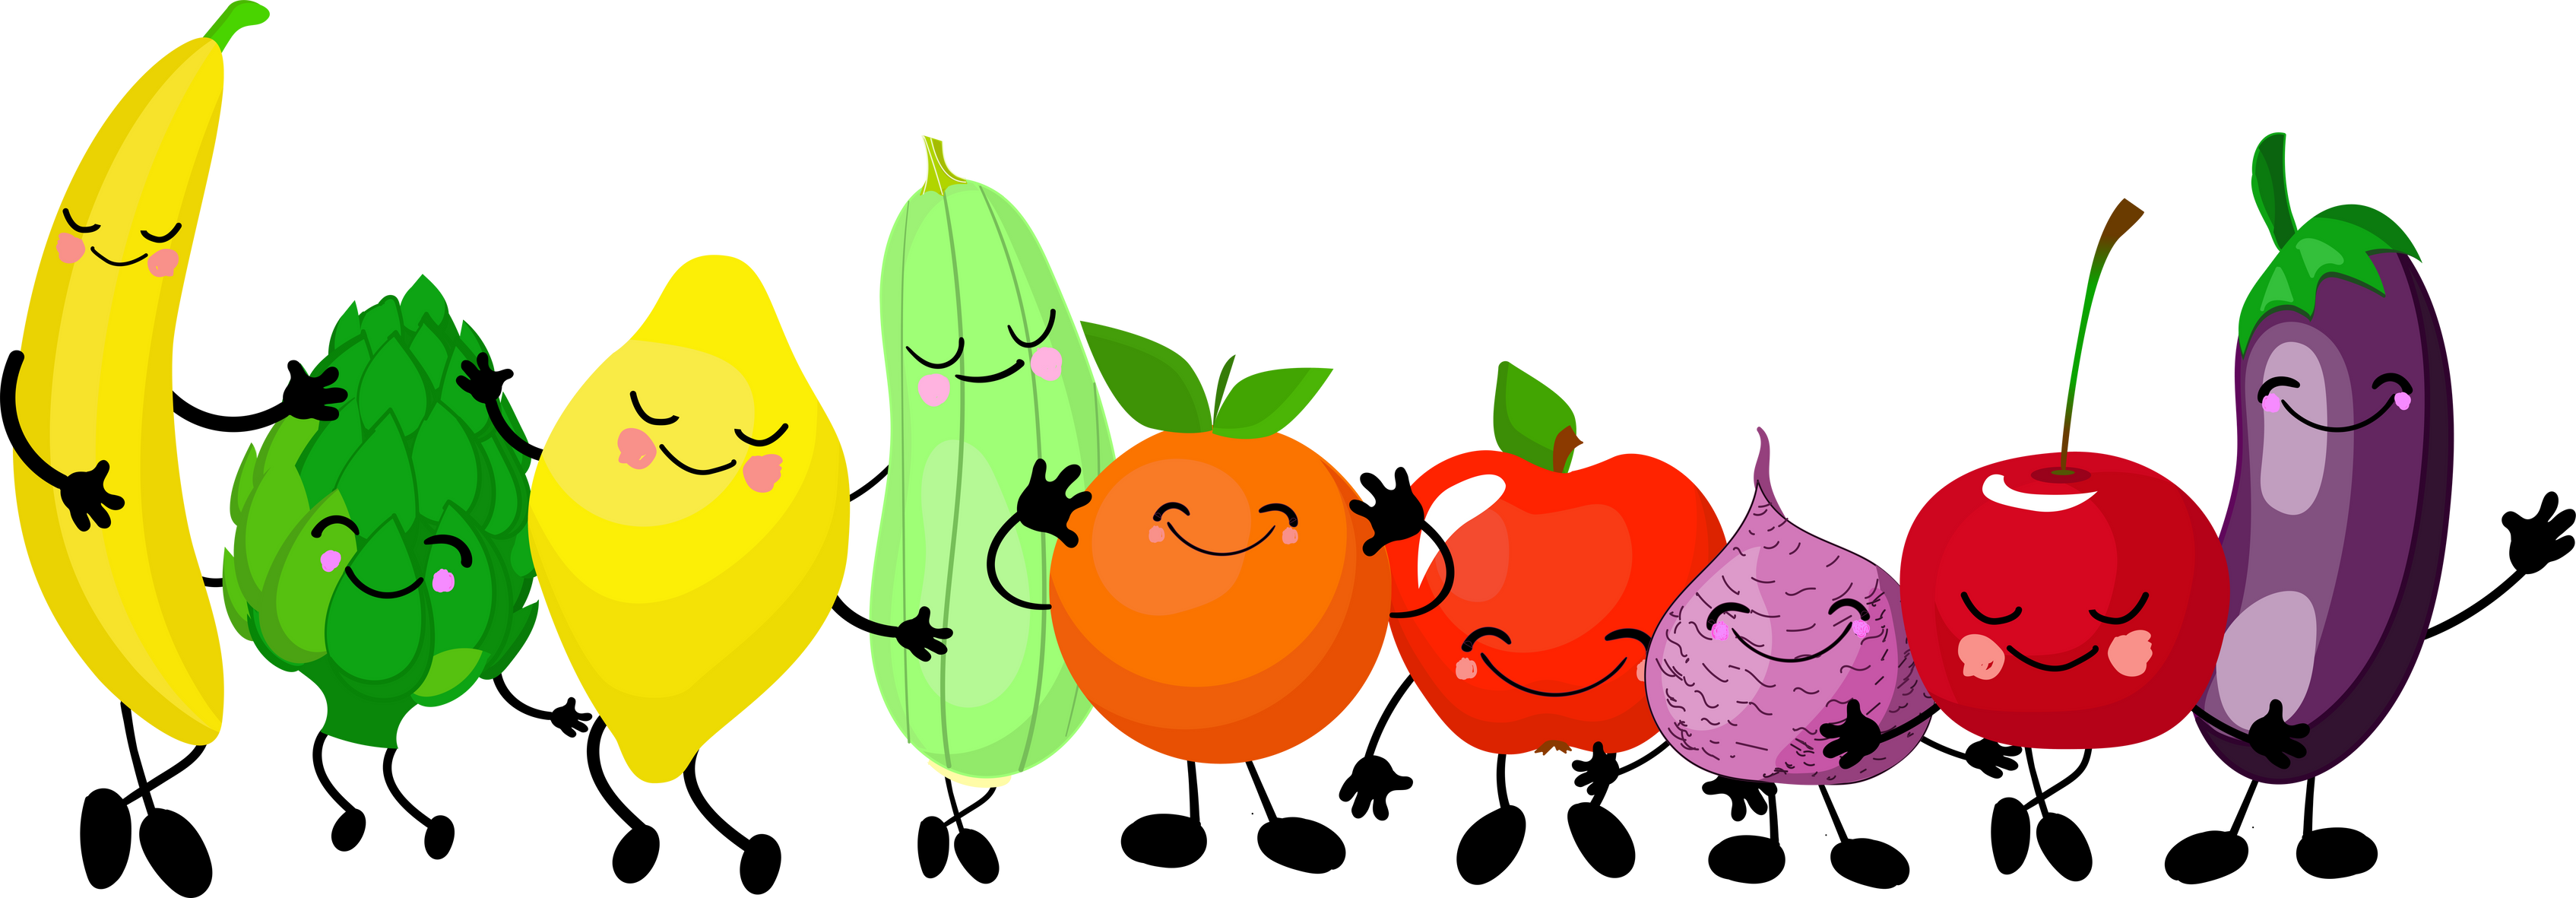 Cute funny vegetables and fruits. Fruit characters for children. healthy vegetables